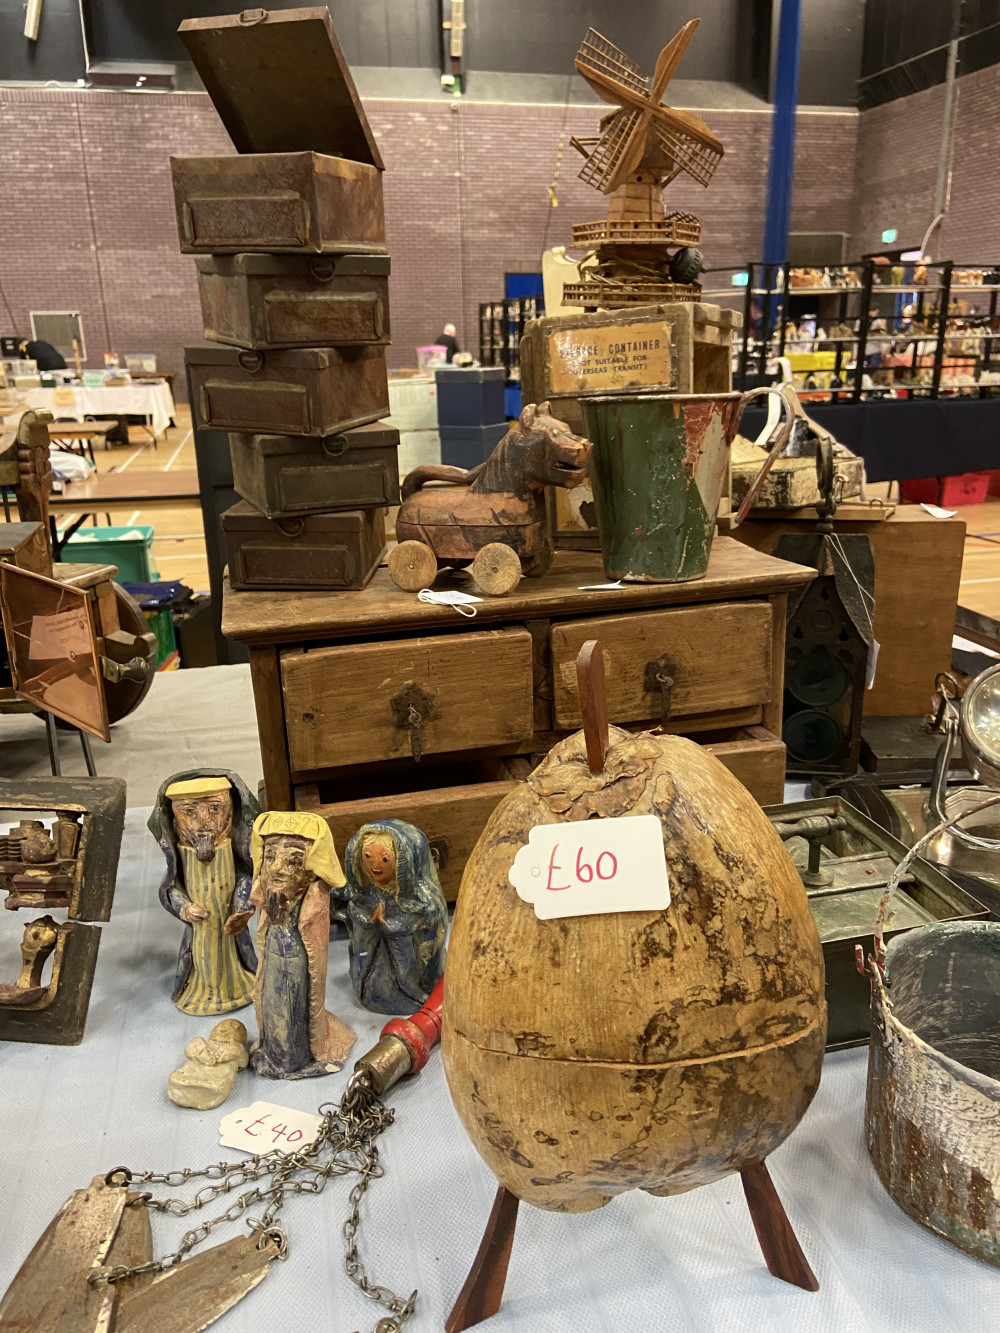 Dealers & Collectors from all around East Anglia and beyond will be selling a huge range of Antique, Vintage & Collectable items